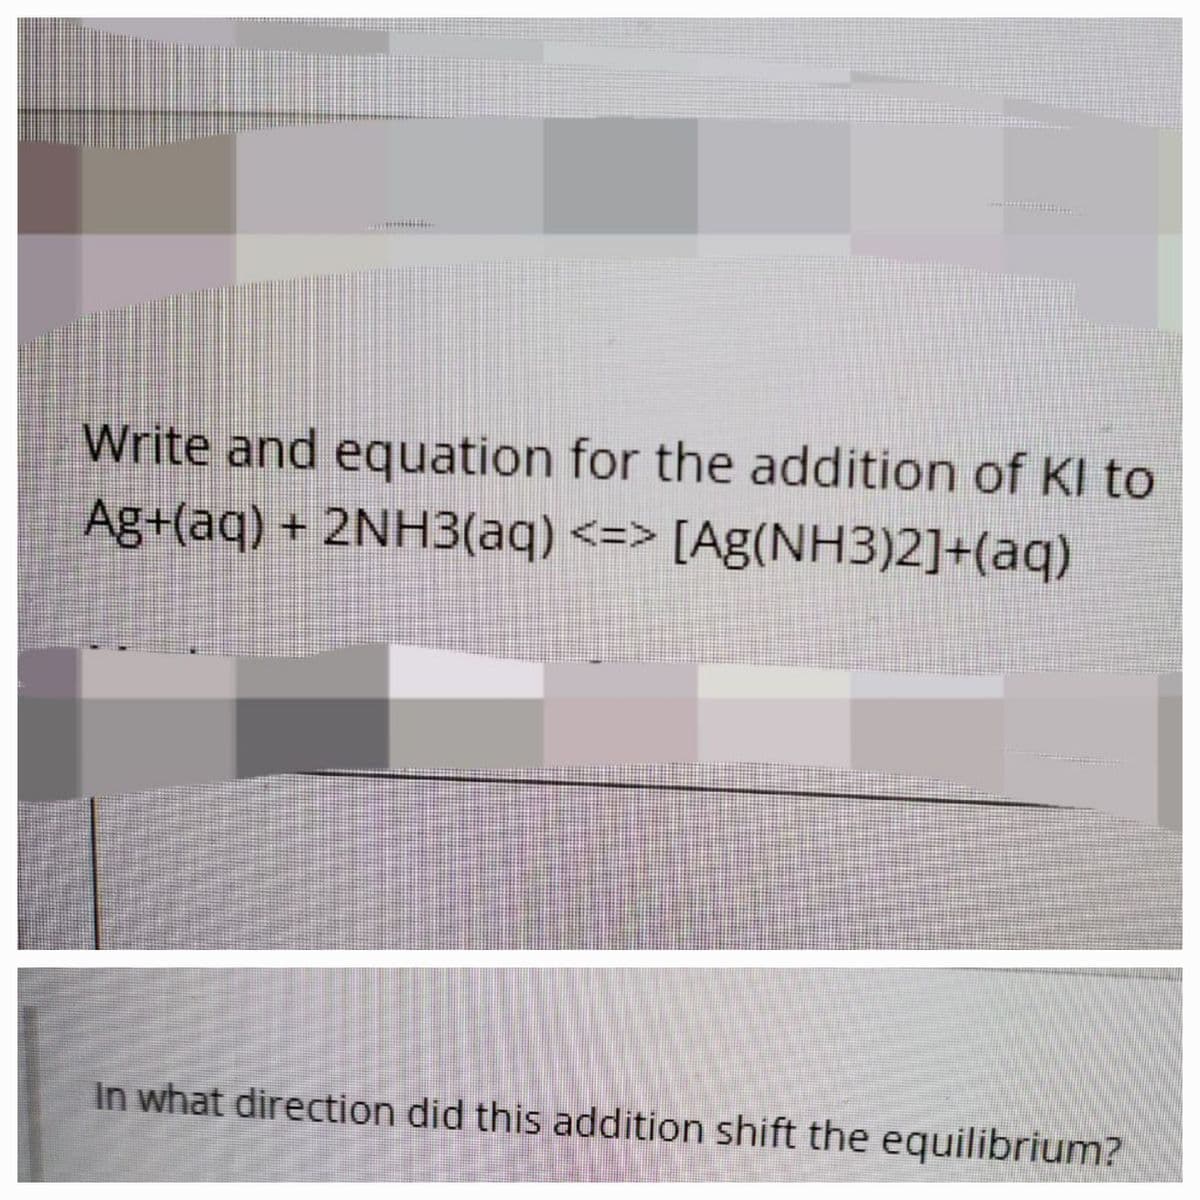 Write and equation for the addition of KI to
Ag+(aq) + 2NH3(aq) <=> [Ag(NH3)2]+(aq)
In what direction did this addition shift the equilibrium?
